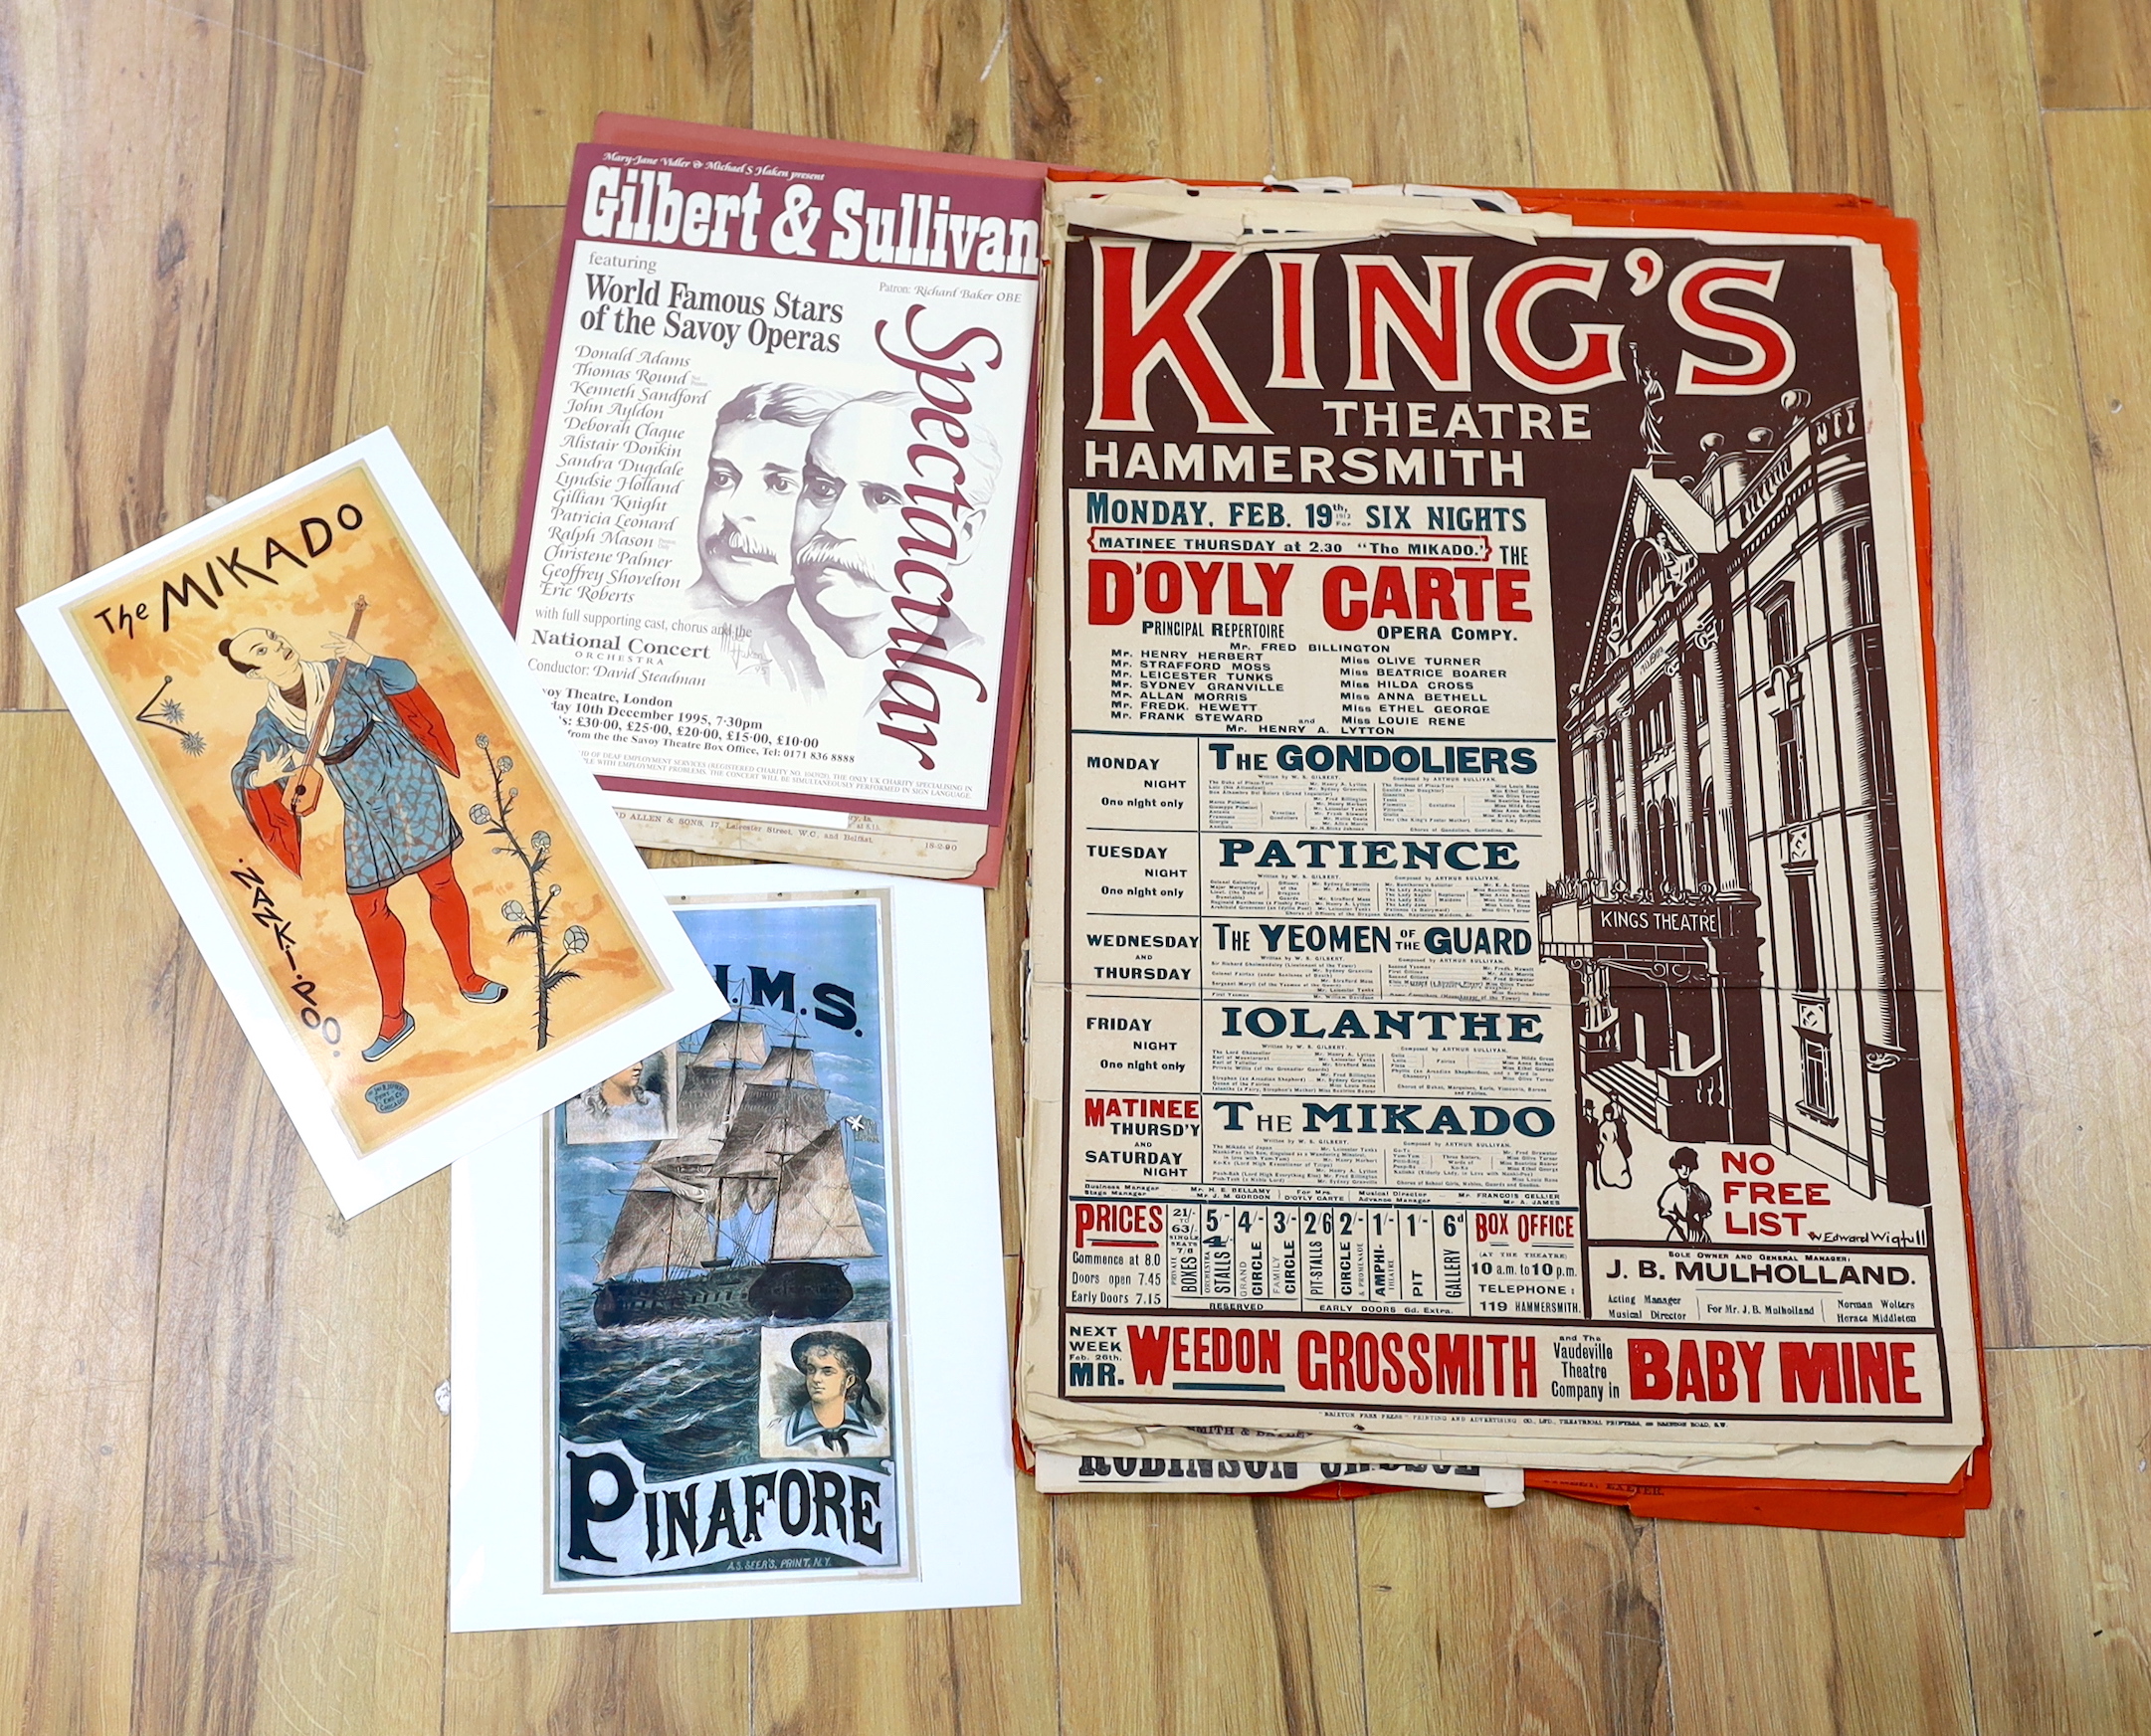 Gilbert & Sullivan and D’Oyly Carte interest; a folder of late 19th century/early 20th century lithograph posters and play bills advertising productions at the Savoy Theatre, King’s Theatre, Broadway Theatre, Fulham Thea